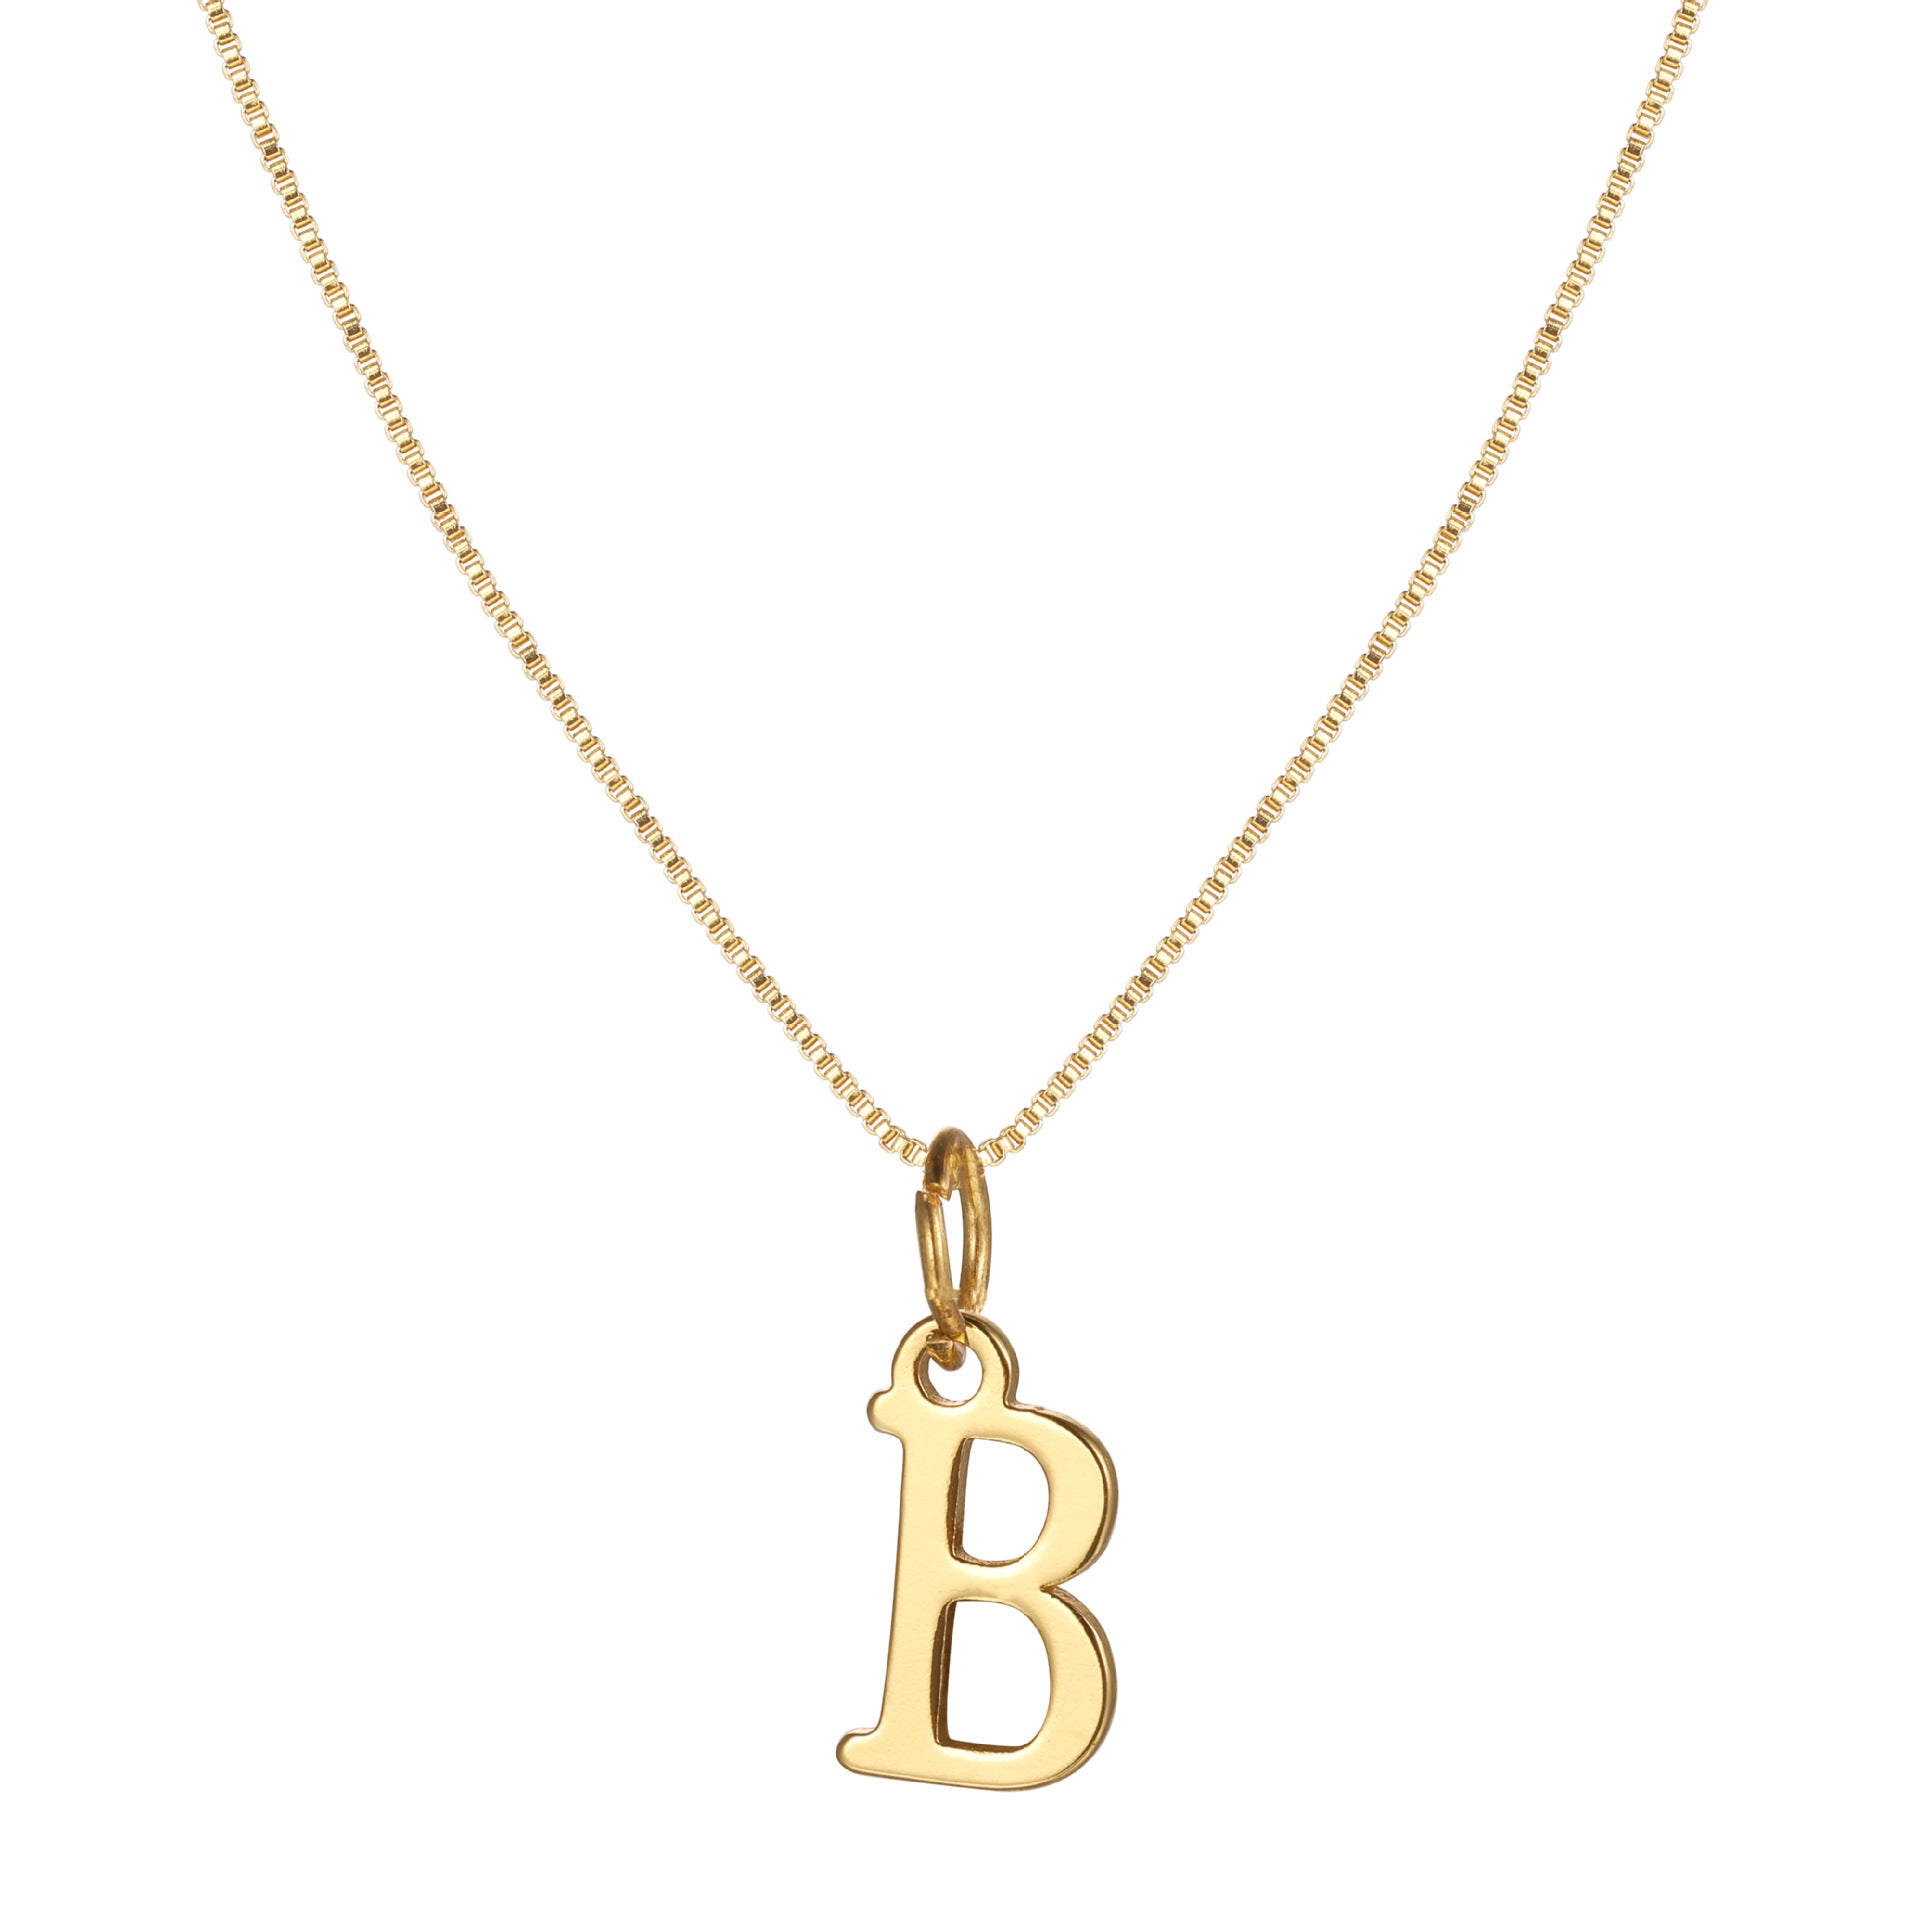 BeautyGlow Flash Sale】Character Necklace,Free shipping on necklace products over 35